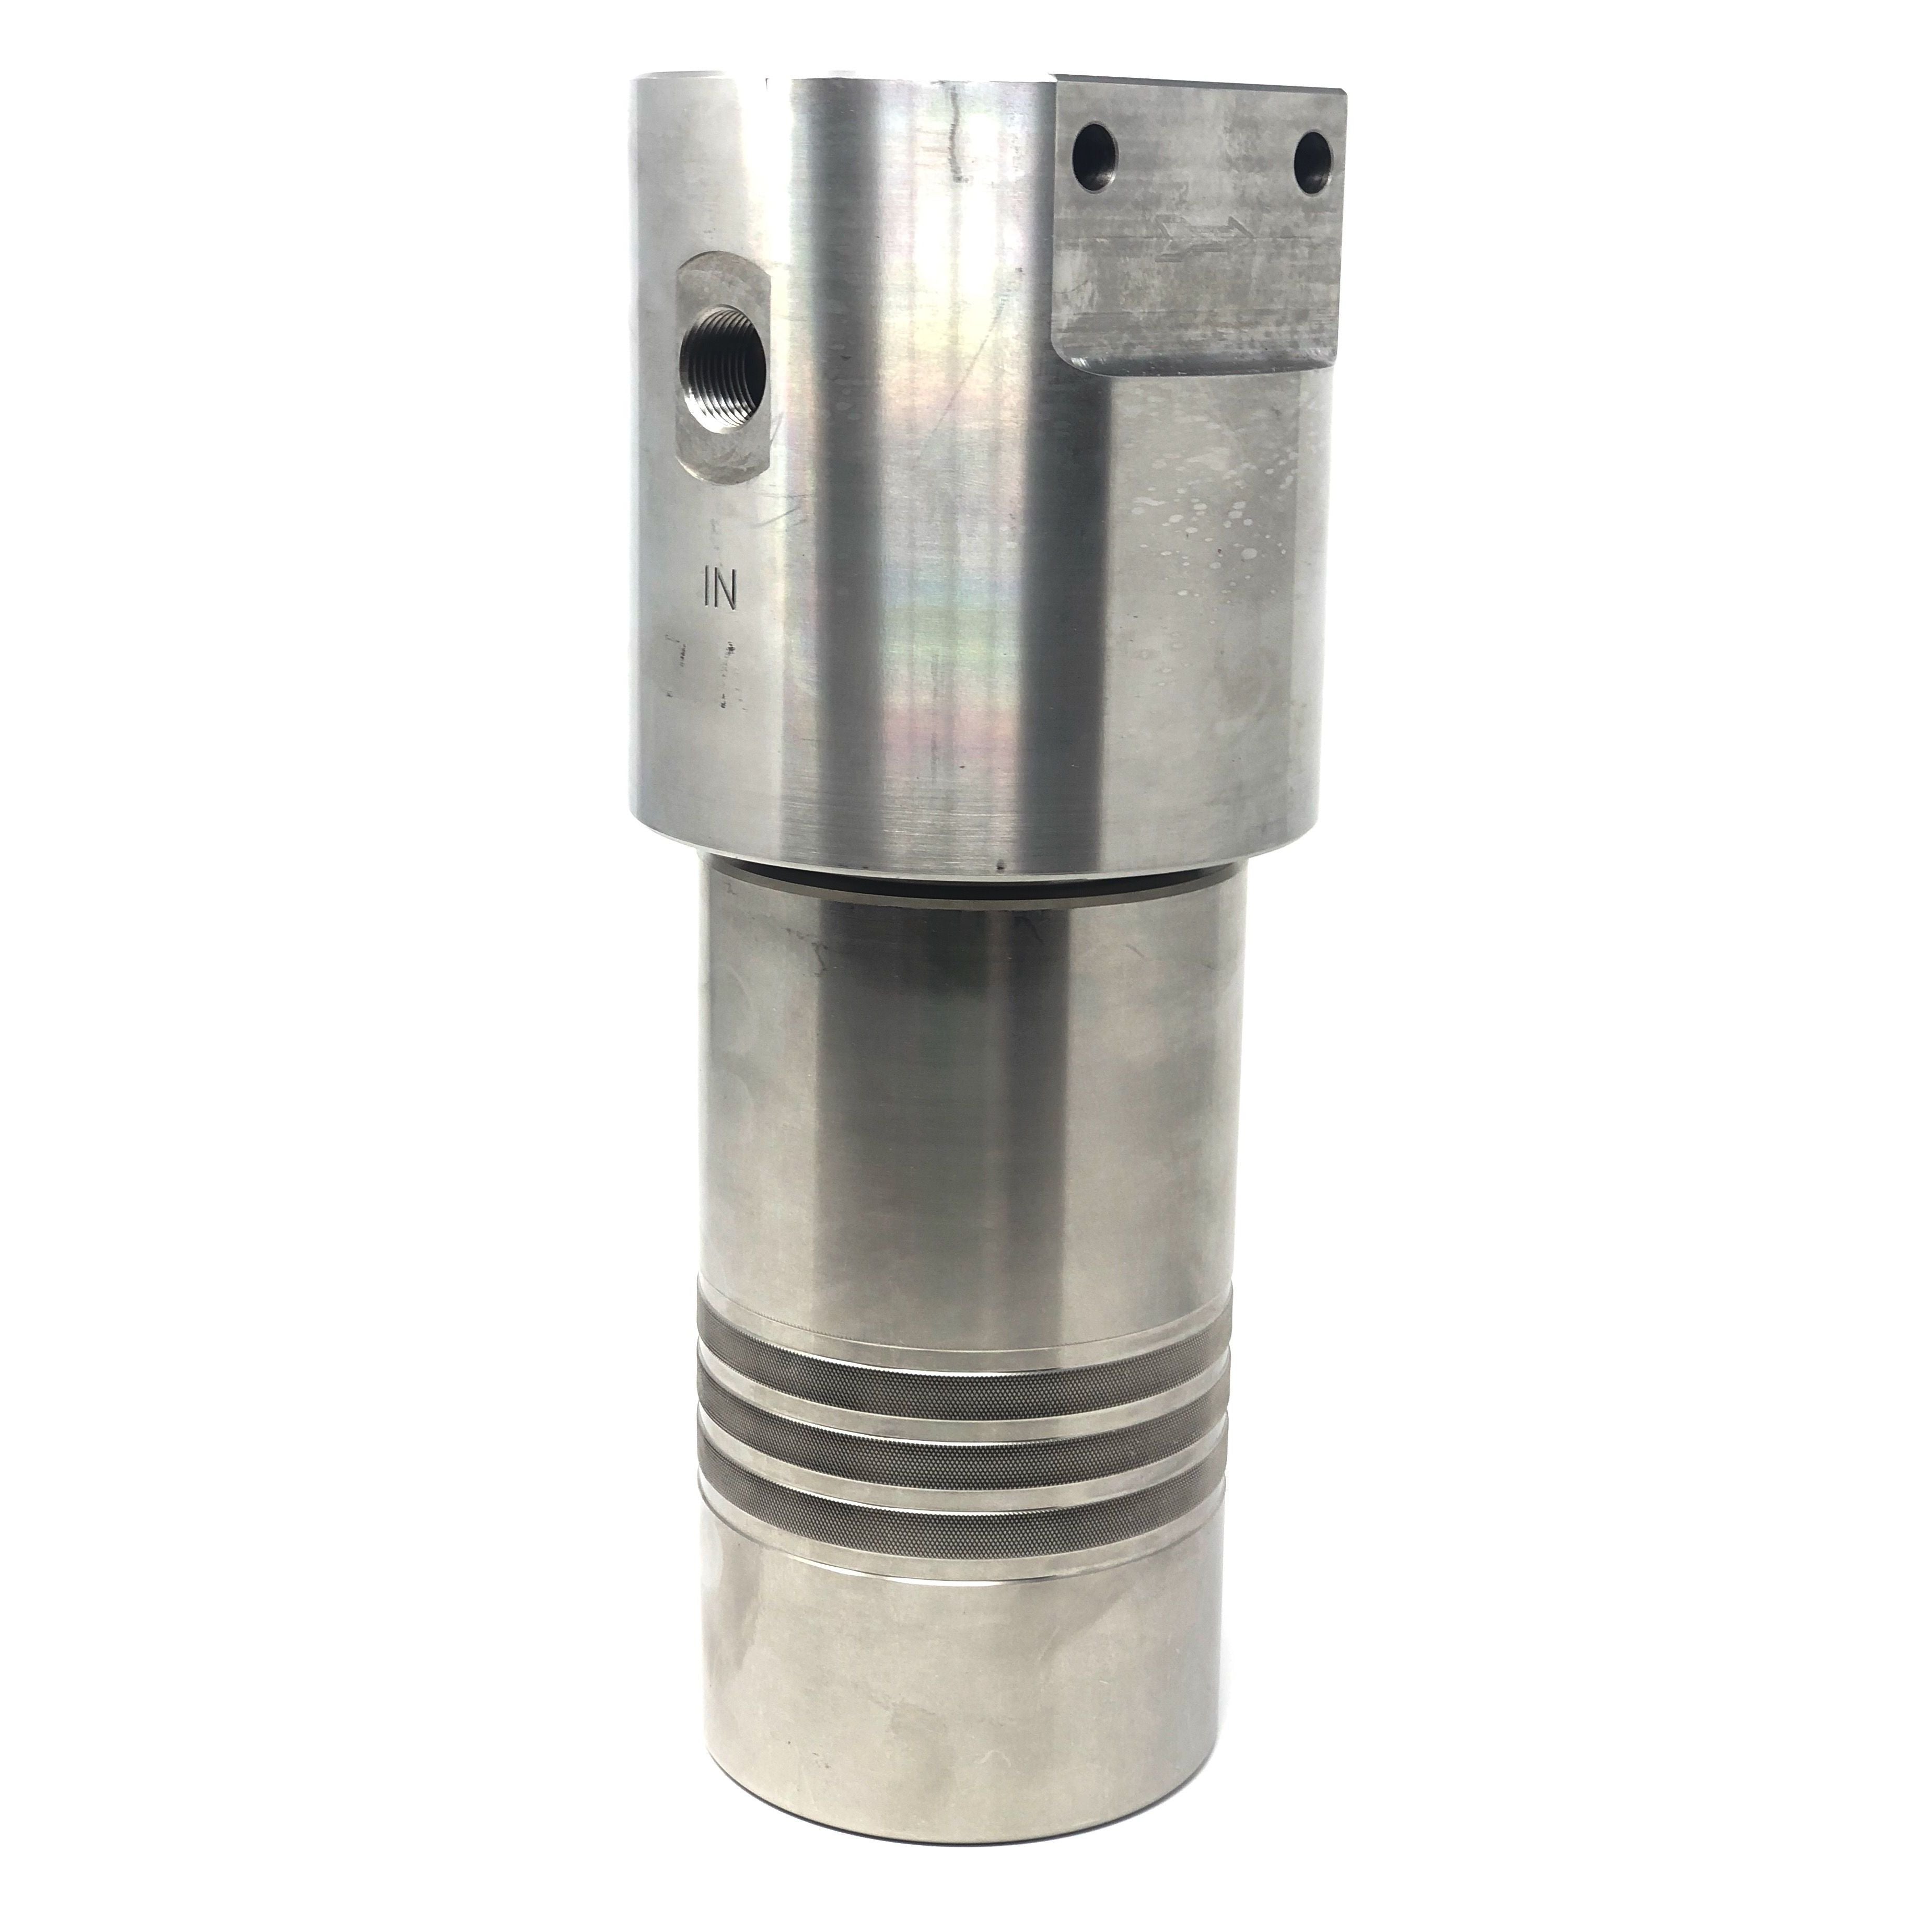 52S-246S-25SEN : Chase Ultra High Pressure Inline Filter, 10000psi, #6 SAE (3/8"), 25 Micron, With Visual Indicator, No Bypass